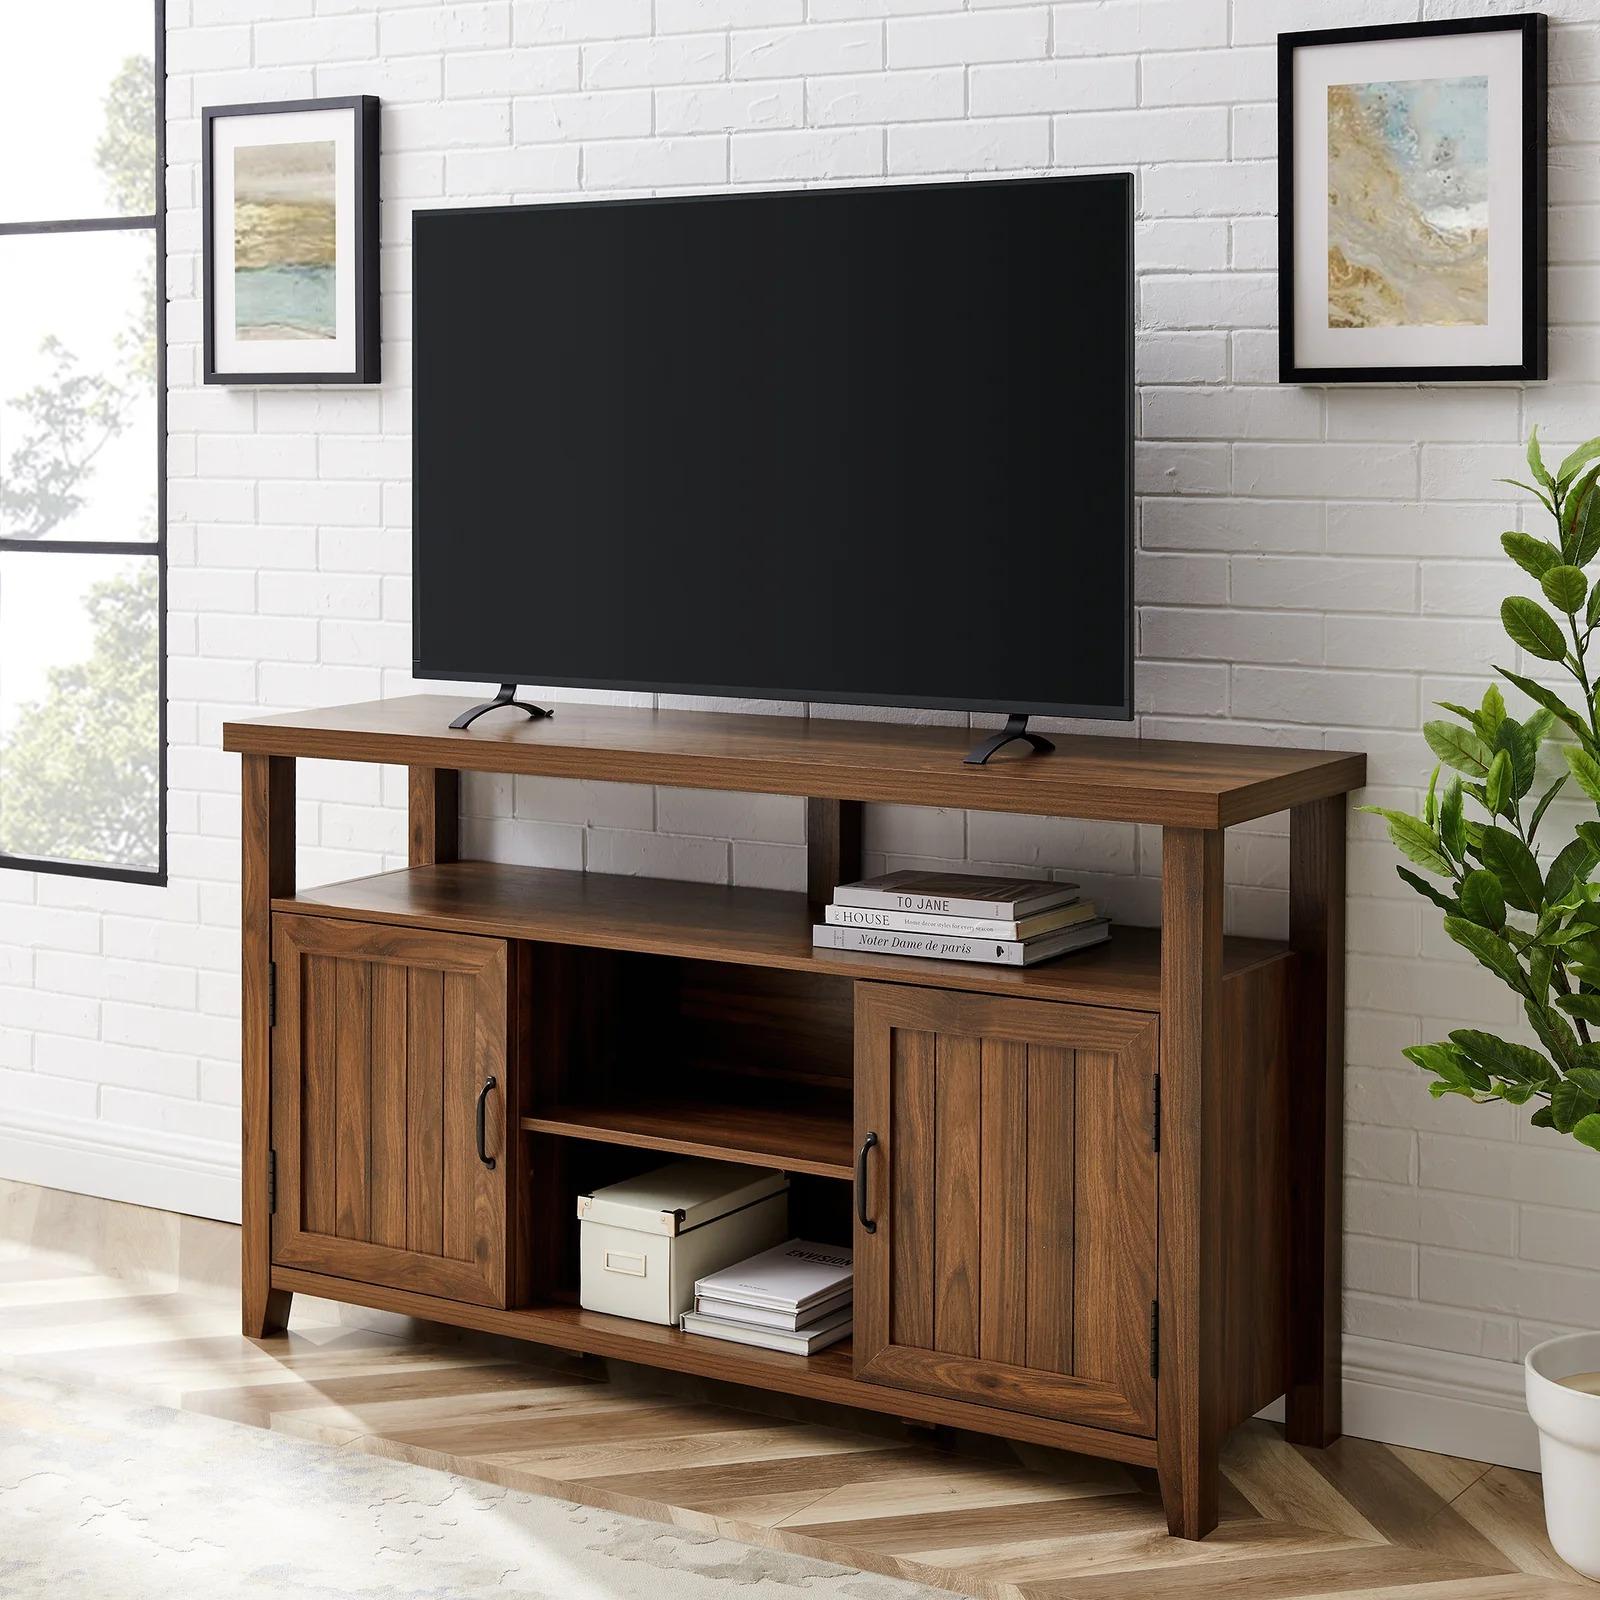 Here's an amazing Black Friday deal you don't want to miss!  ee1c5361 favio tv stand for tvs up to 65